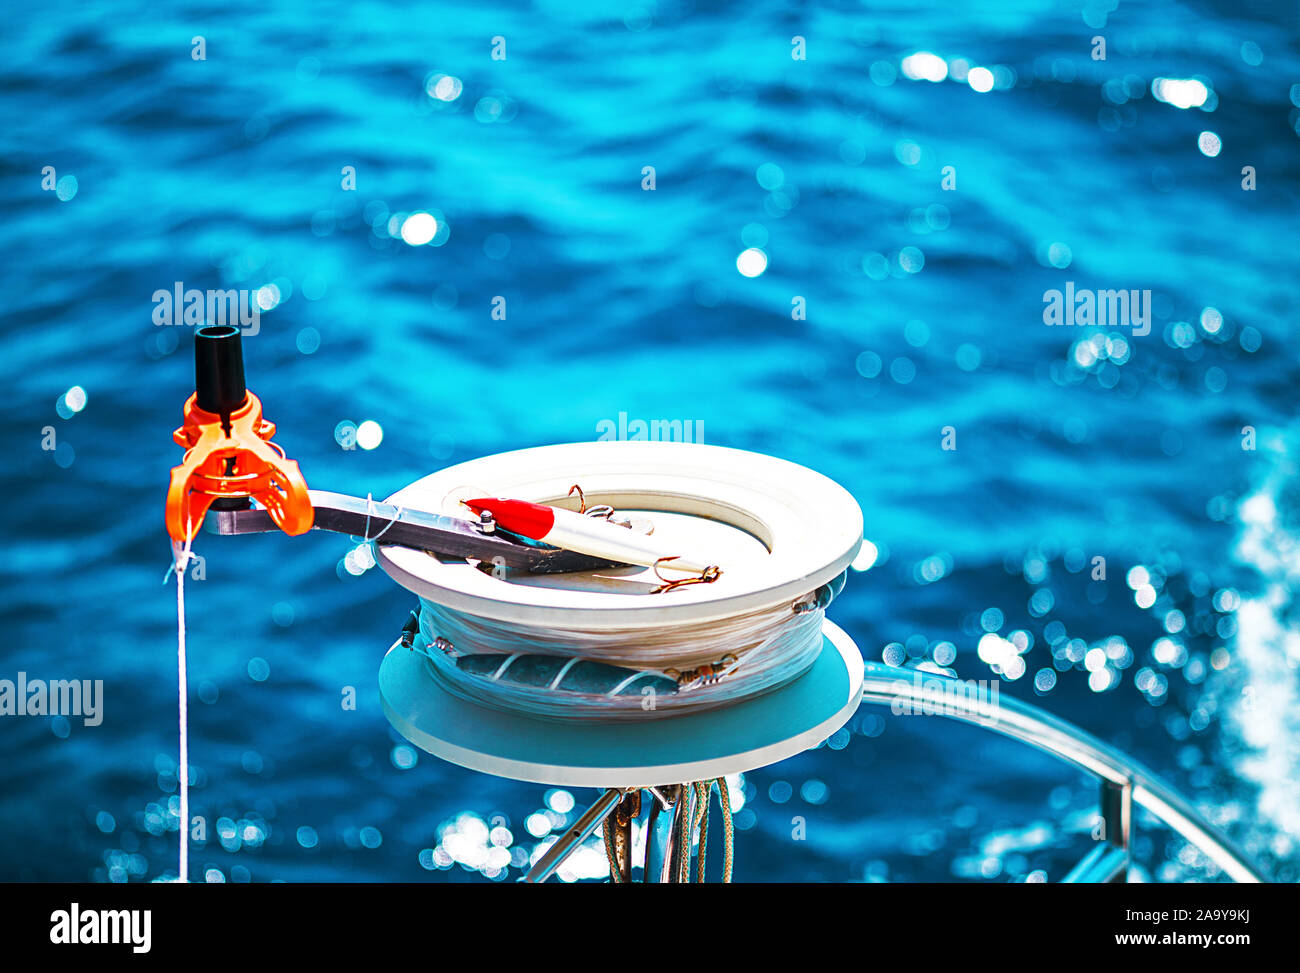 Fishing reel or rod reel, rod. Sailing yacht catamaran in the sea in Greece, turquoise waters of Aegean Sea near Athens. Famous travel sailing destination in Europe. Sailboat. Selective focuse. Stock Photo